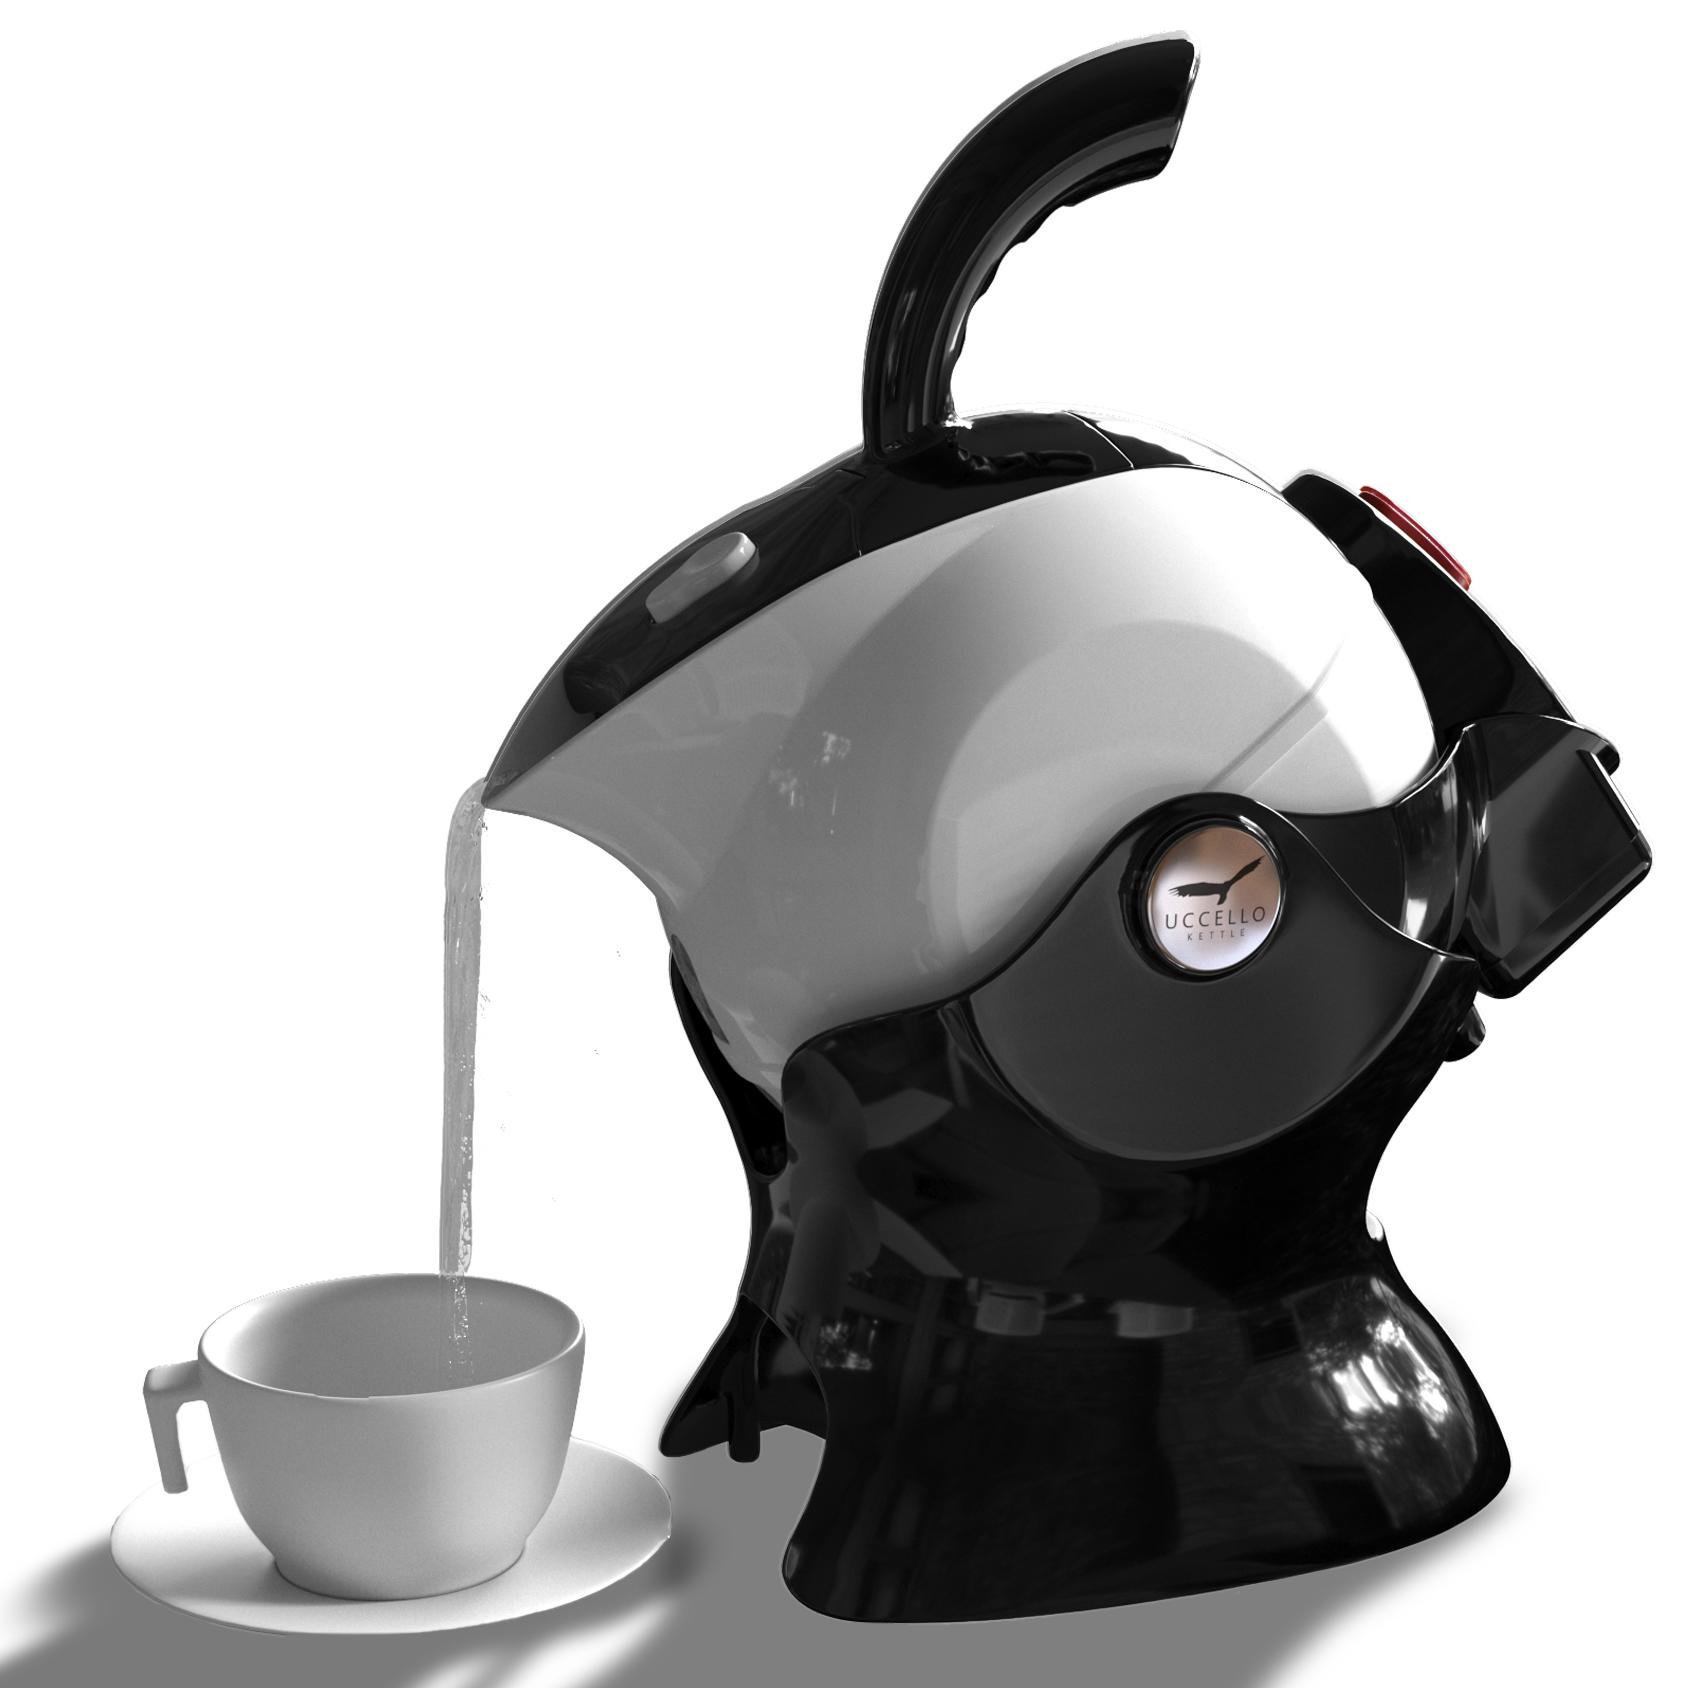 Uccello Kettle Black and White Pouring